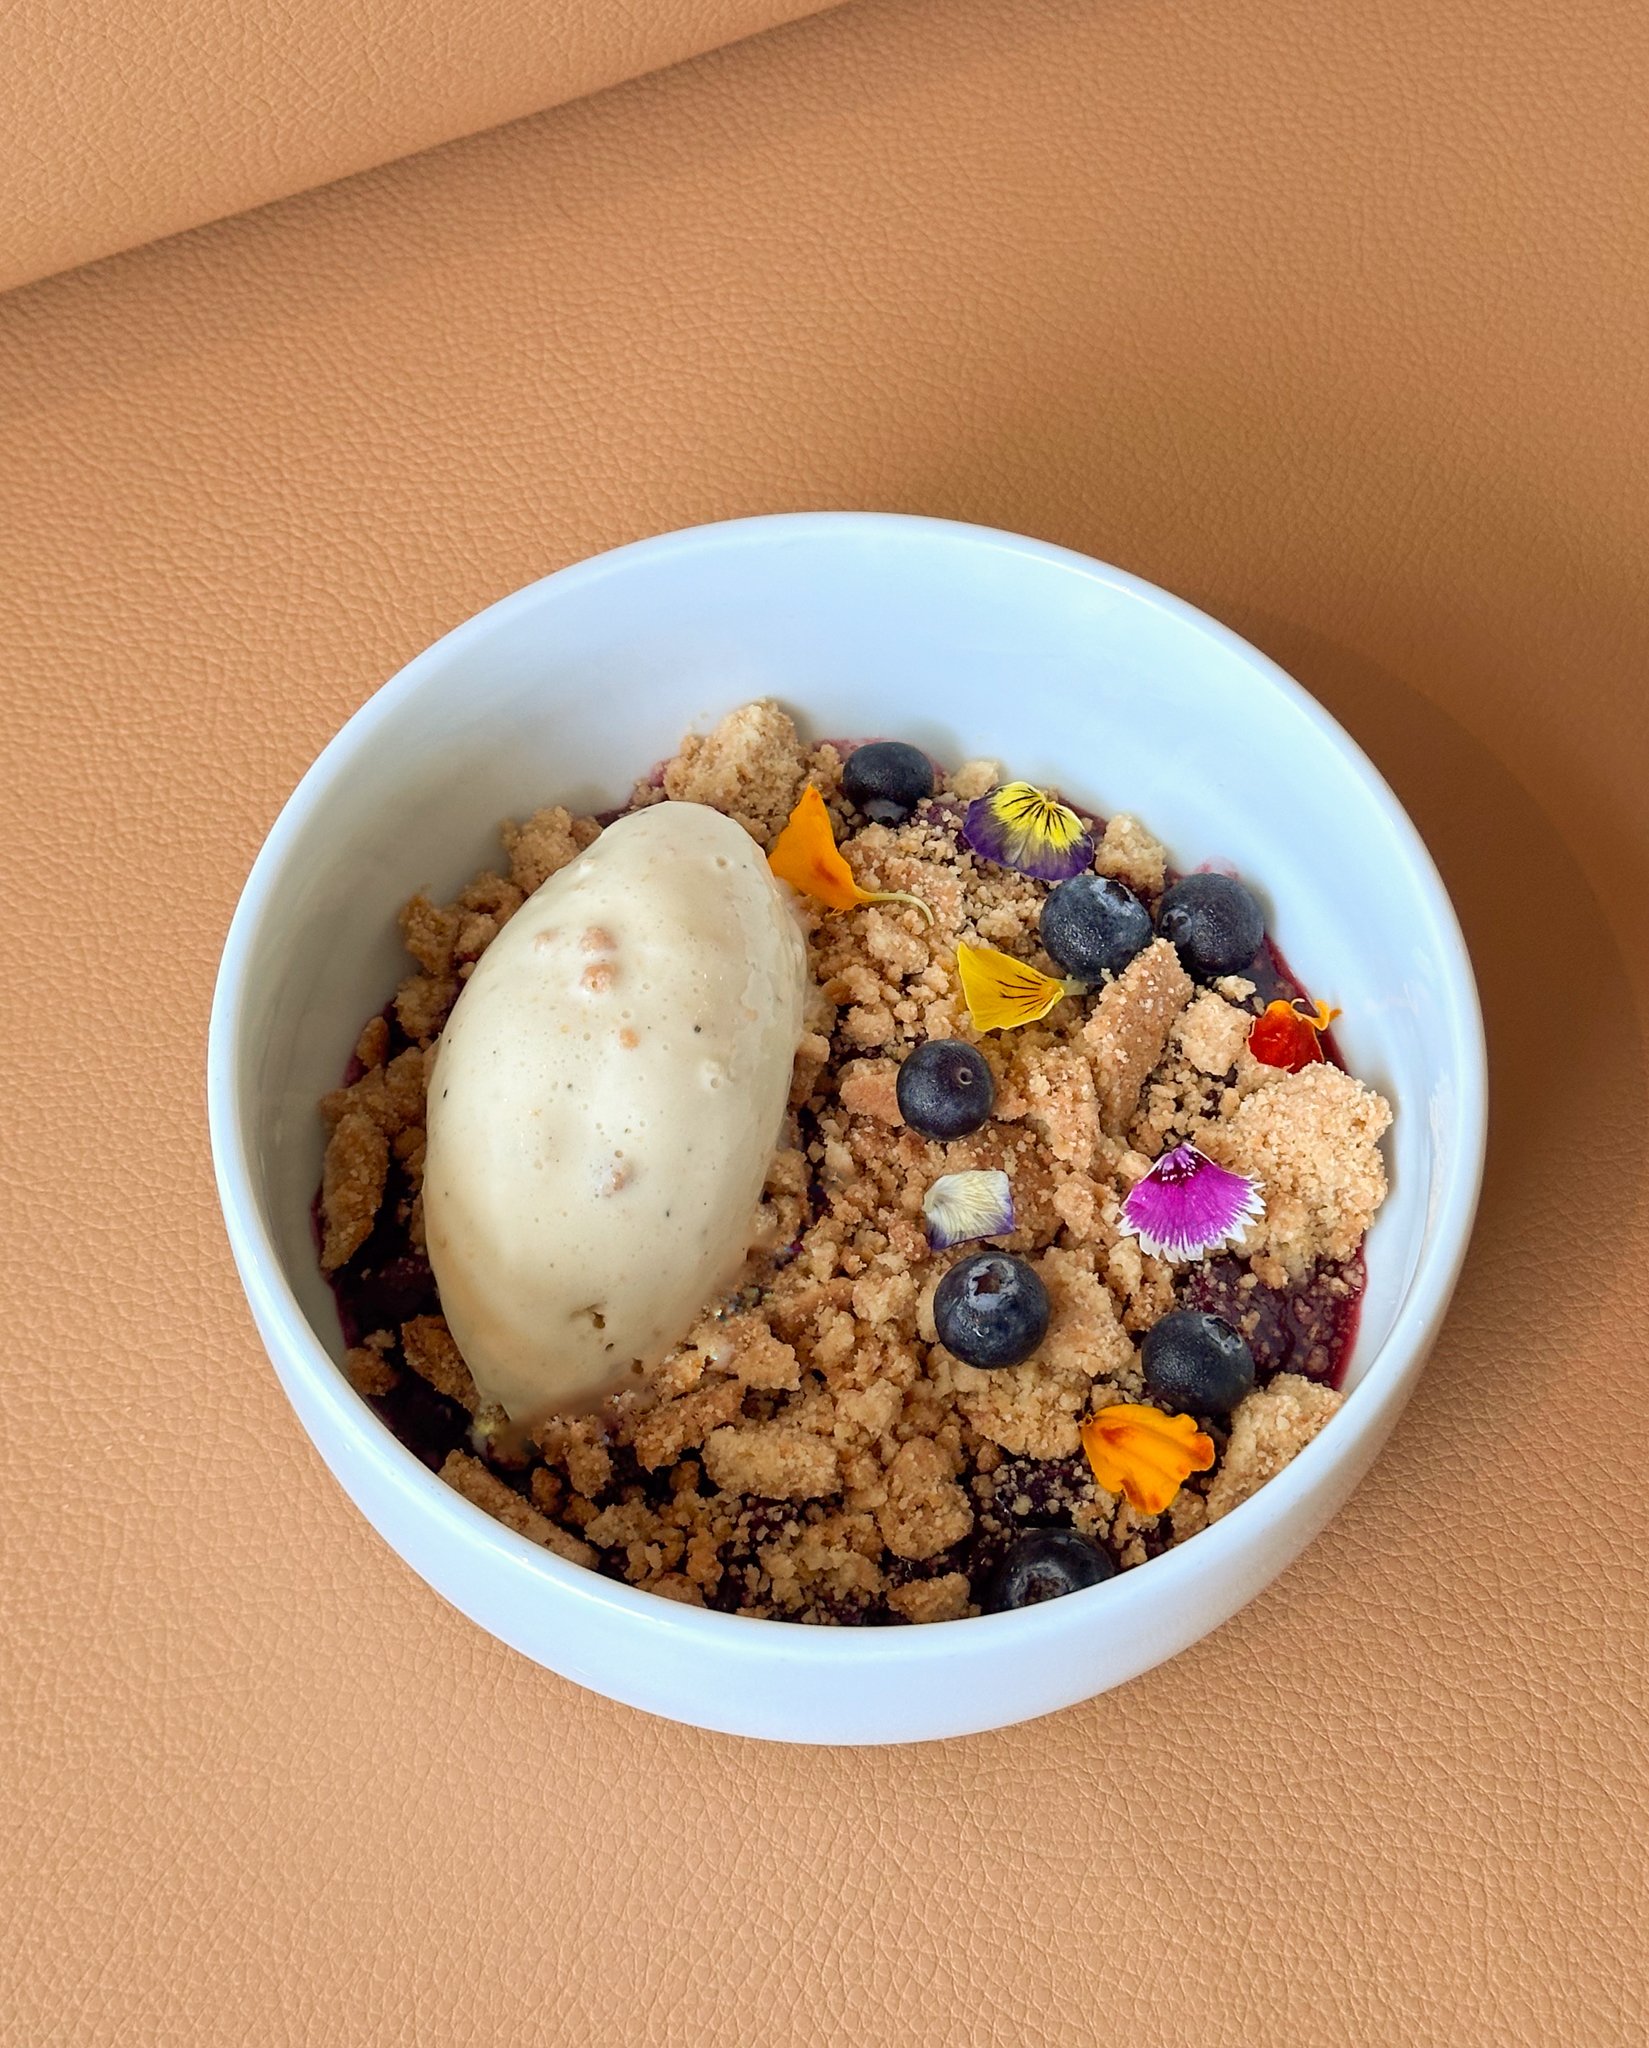 Mother's Day Special // Round up a lovely meal at Caffe Fernet with Mom with our Cherry Blueberry Crumble, available exclusively from 10 to 12 May.

Tangy cherry and blueberry compote is topped generously with almond crumble for complementary savoury